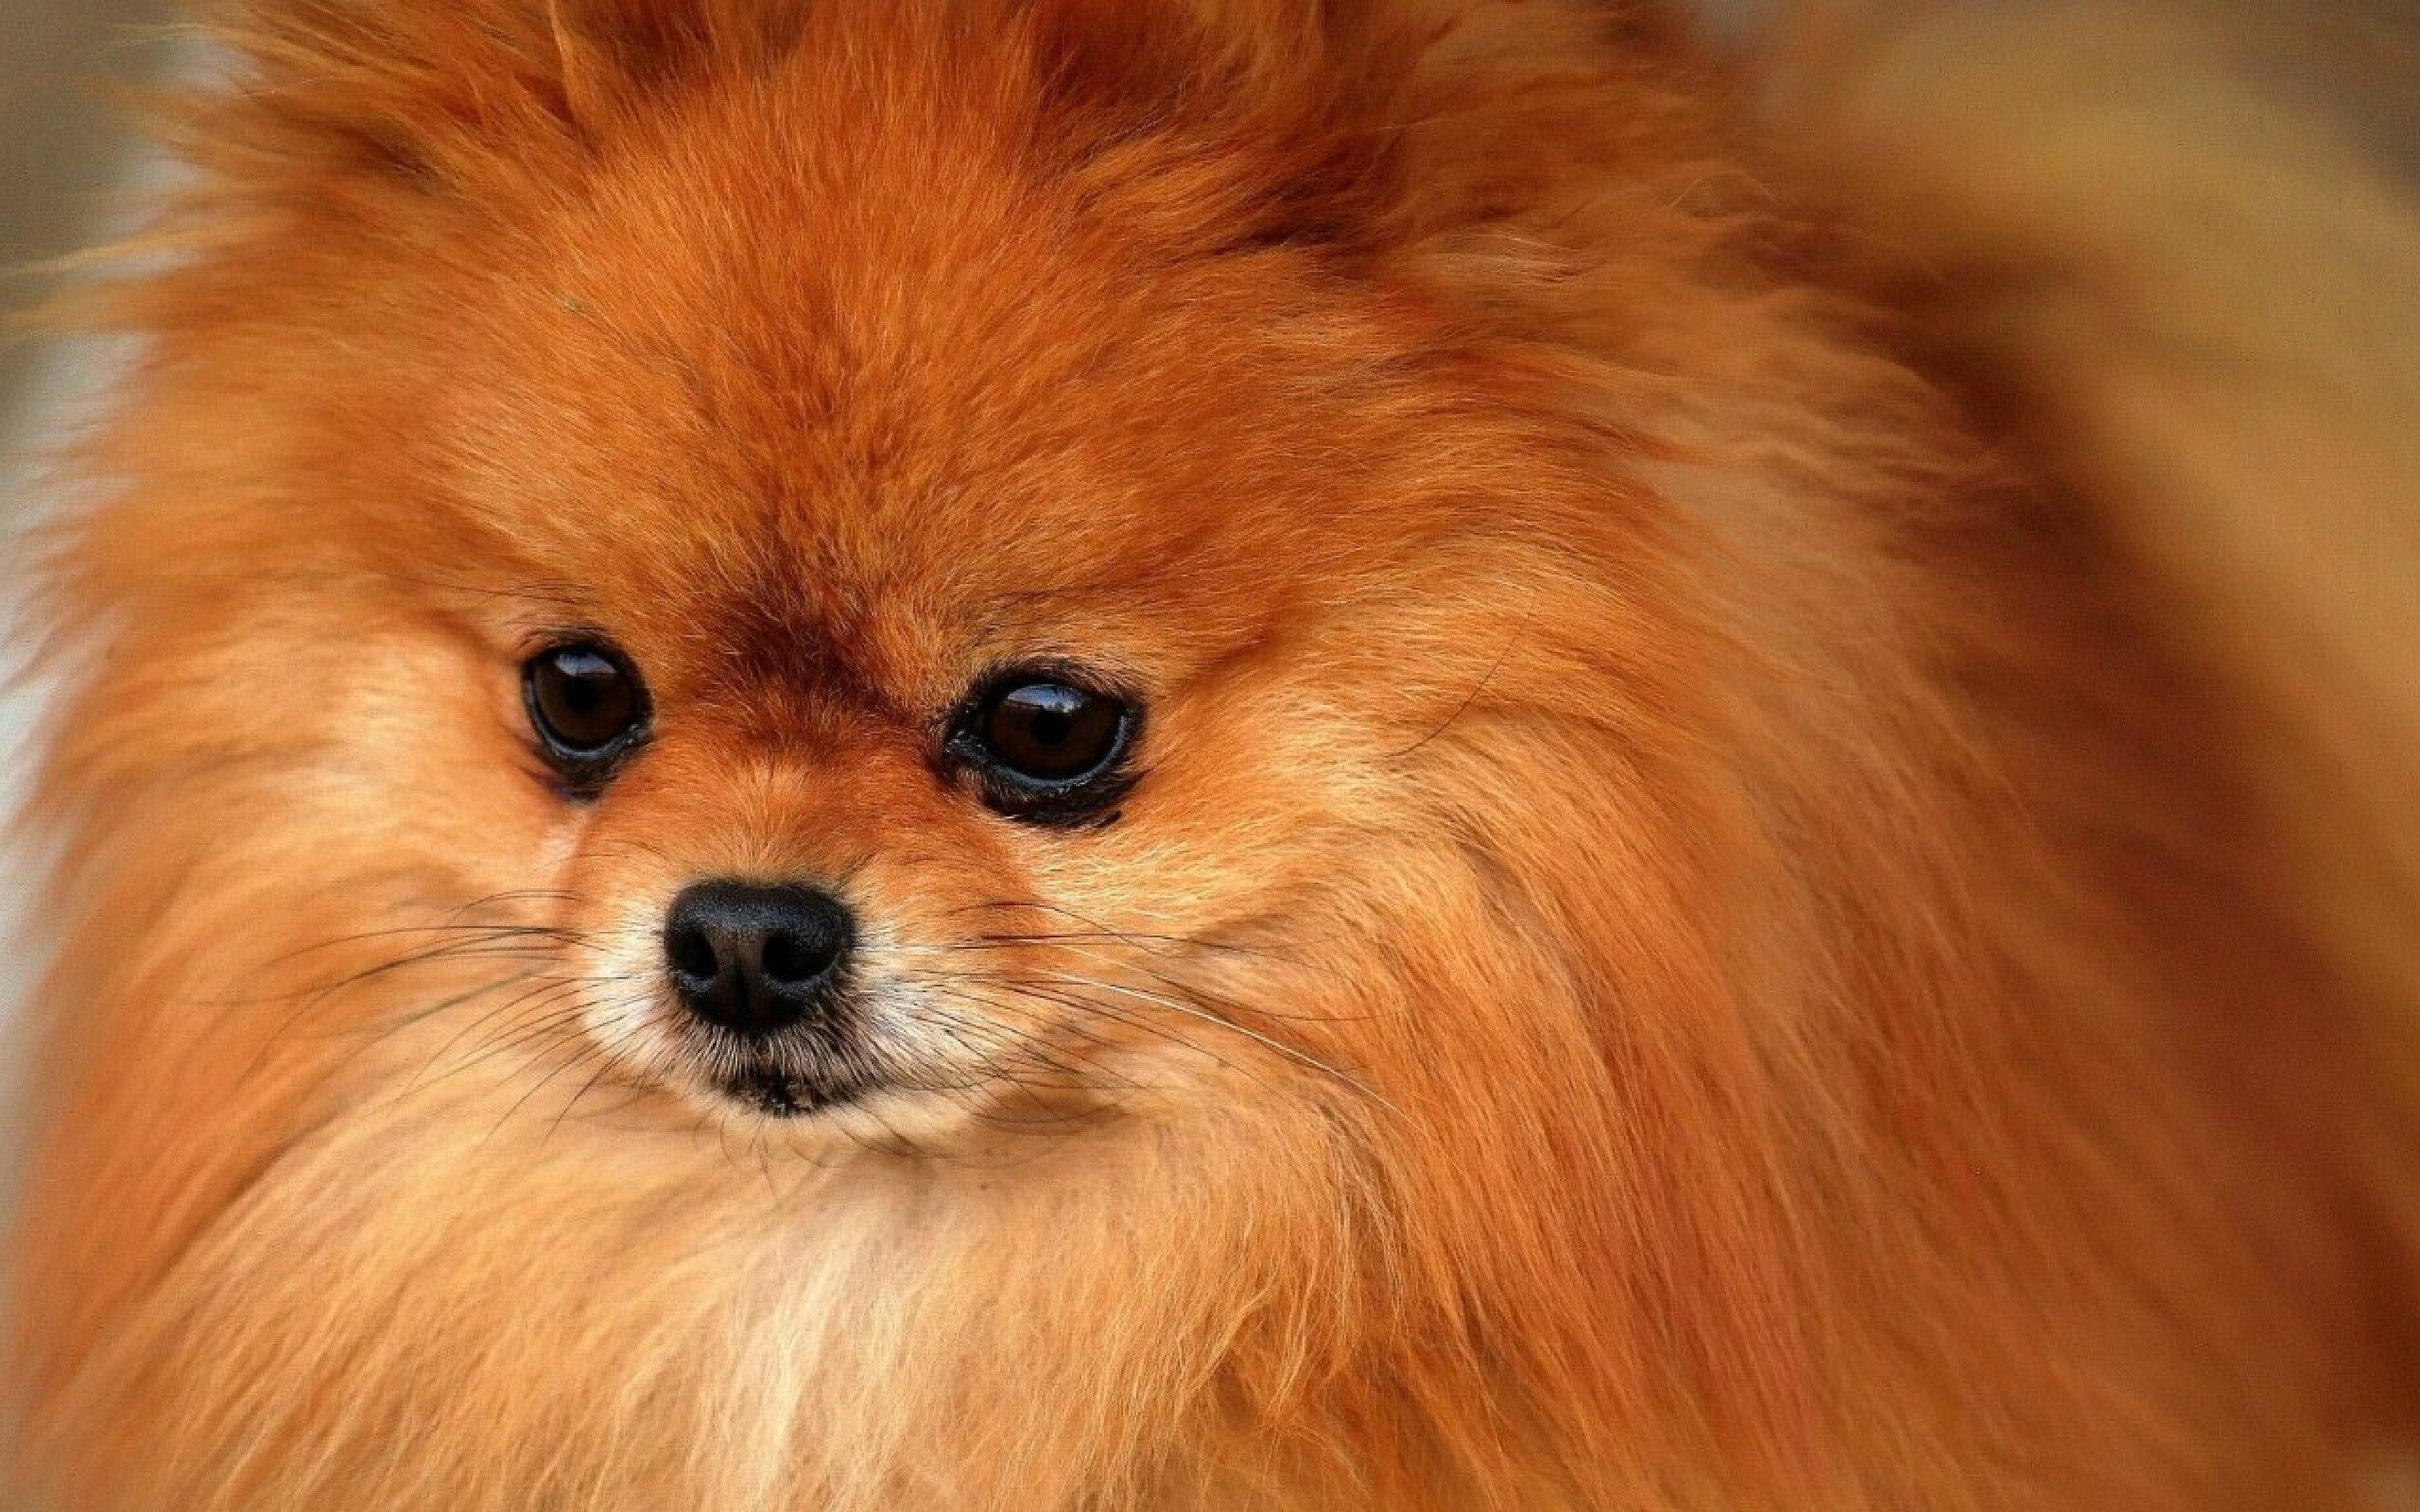 Pomeranian: The breed comes in the widest variety of colors of any dog breed. 2560x1600 HD Wallpaper.